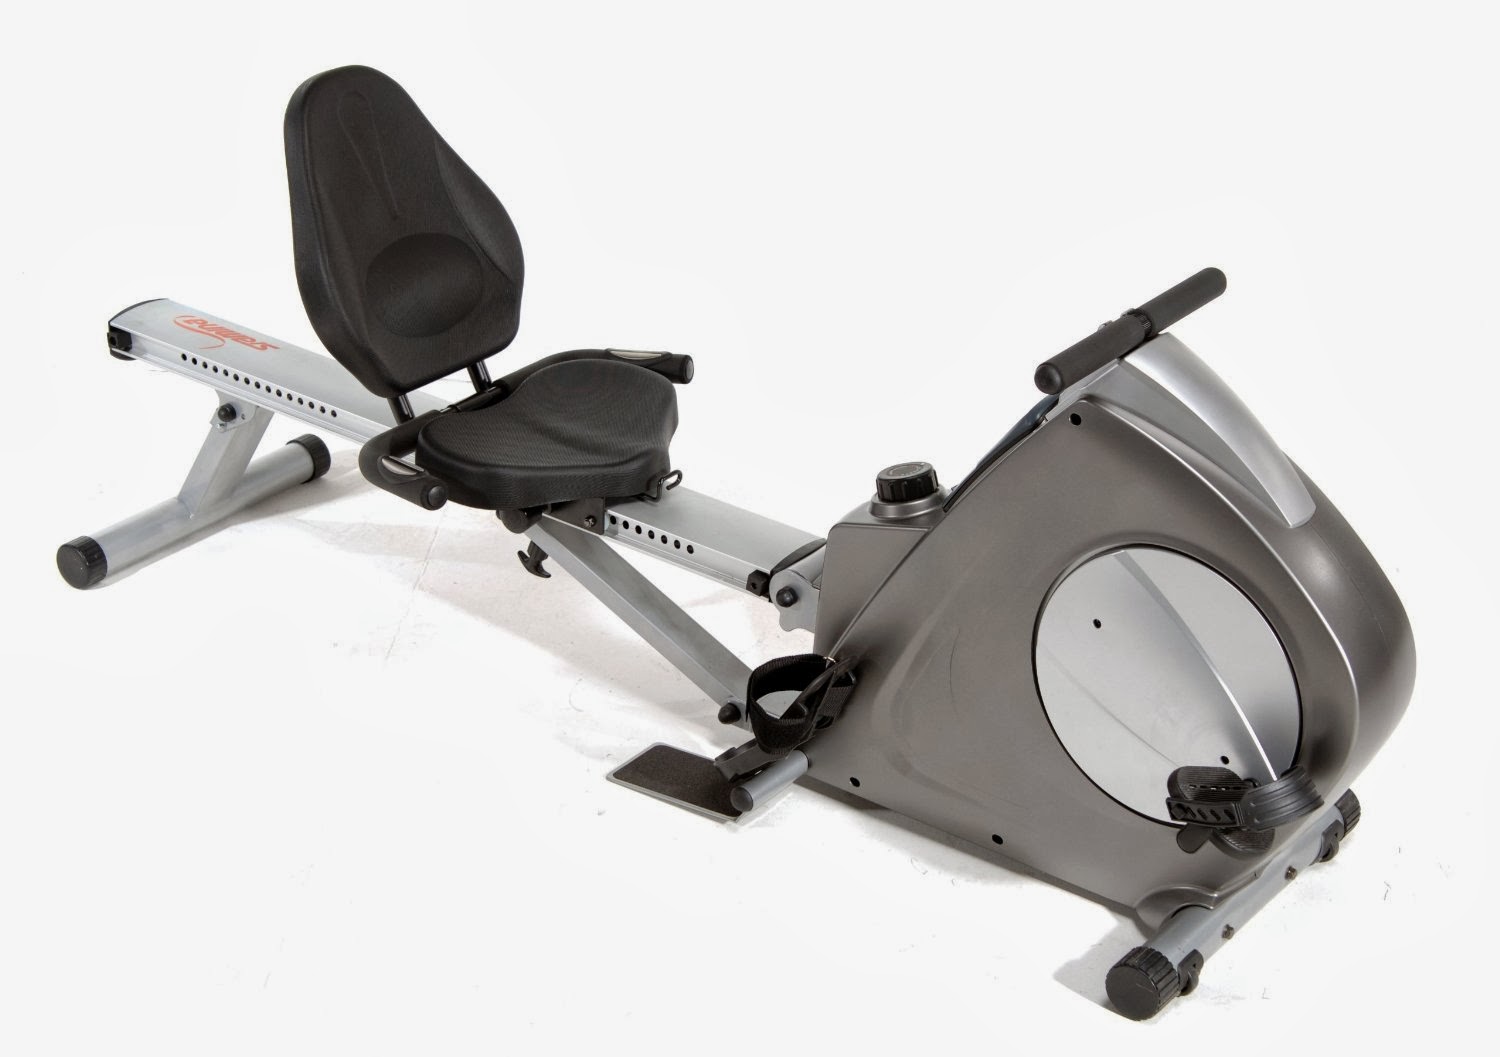 Get the benefits of cycling & rowing in 1 machine with a Stamina 15-9003 Deluxe Conversion II Recumbent/Rower